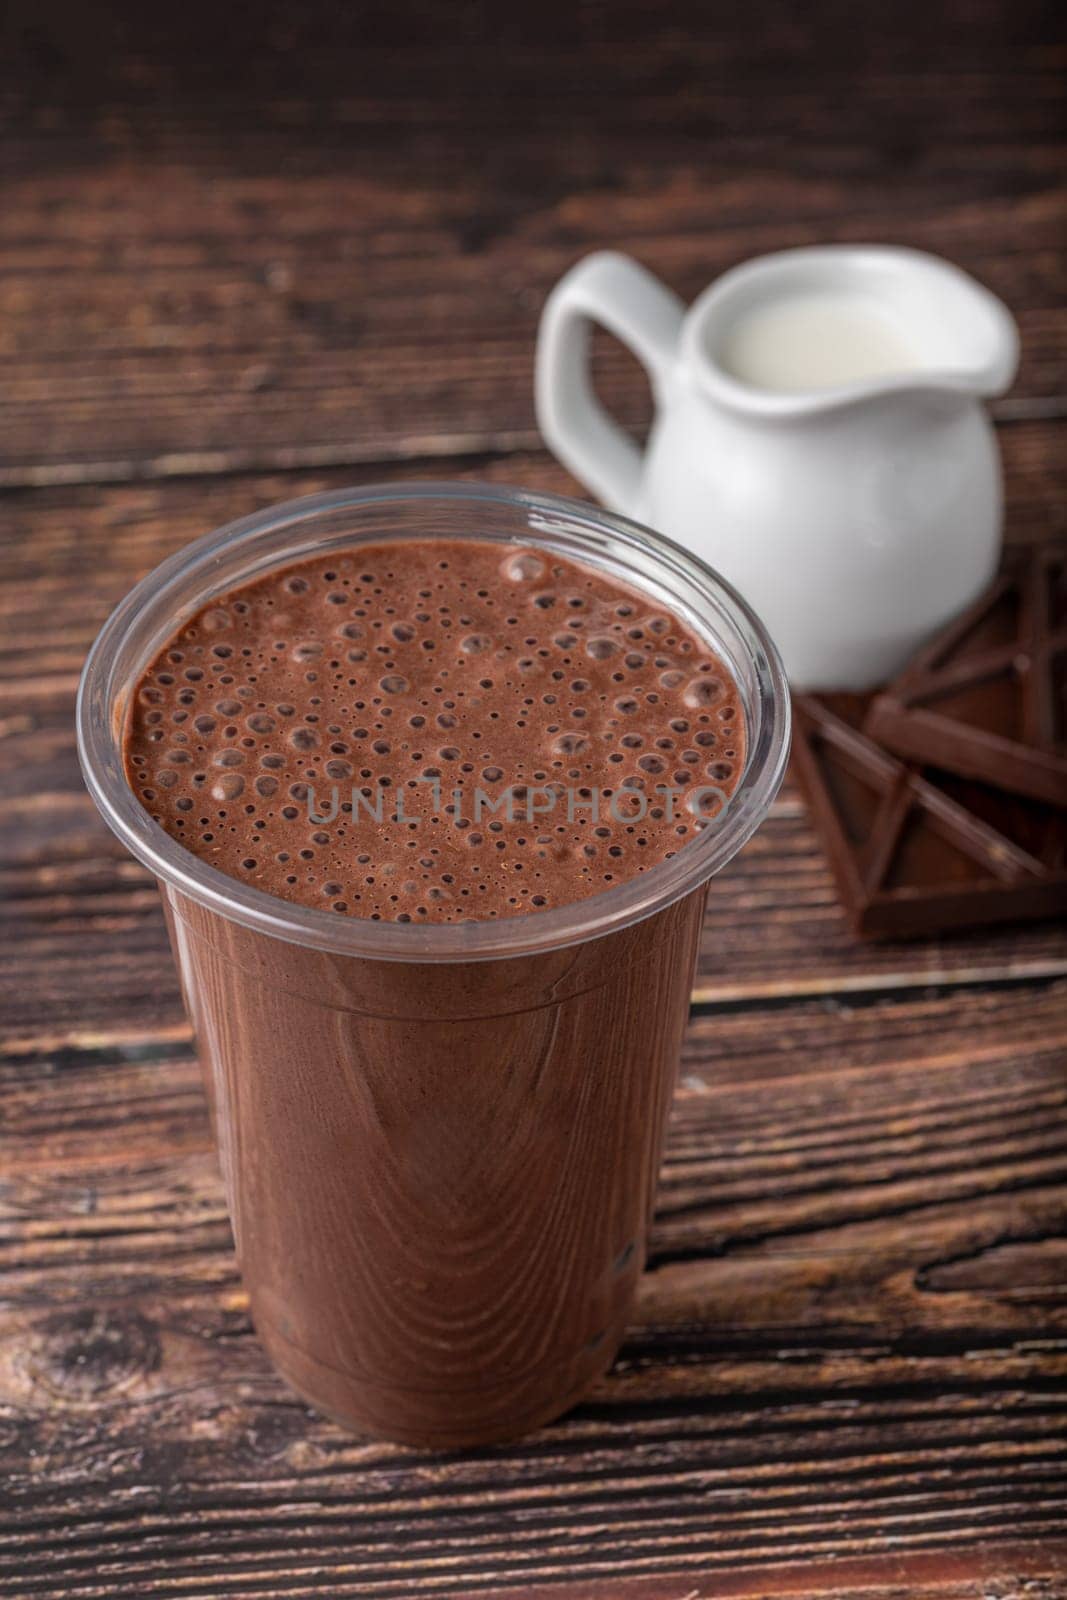 Chocolate milk in take away glass on wooden table by Sonat